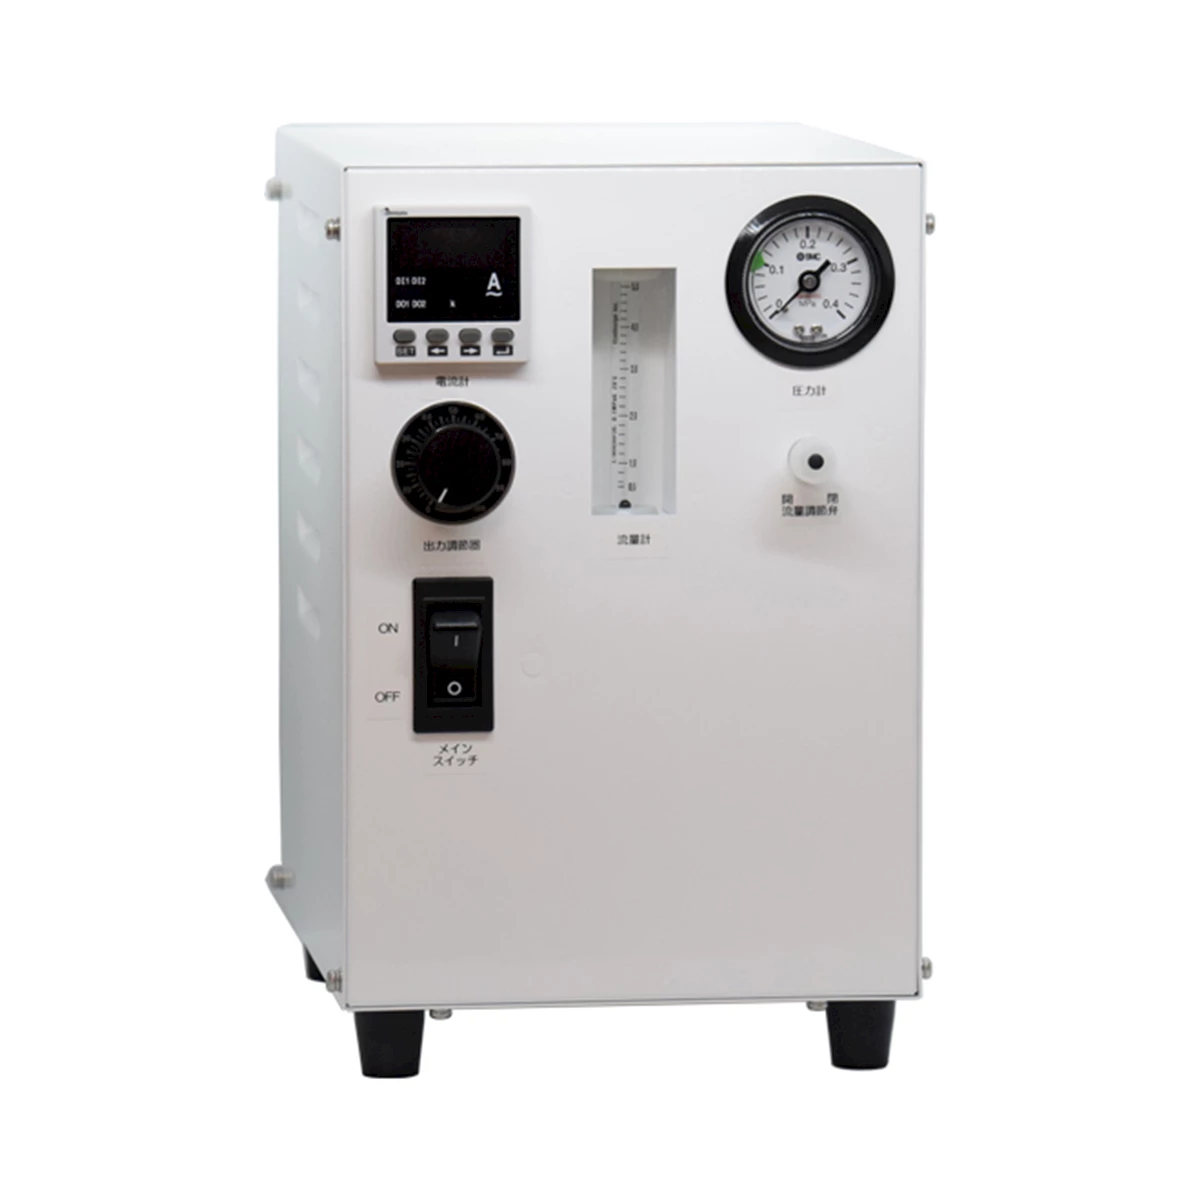 high quality 5G ozone generator, with flow meter